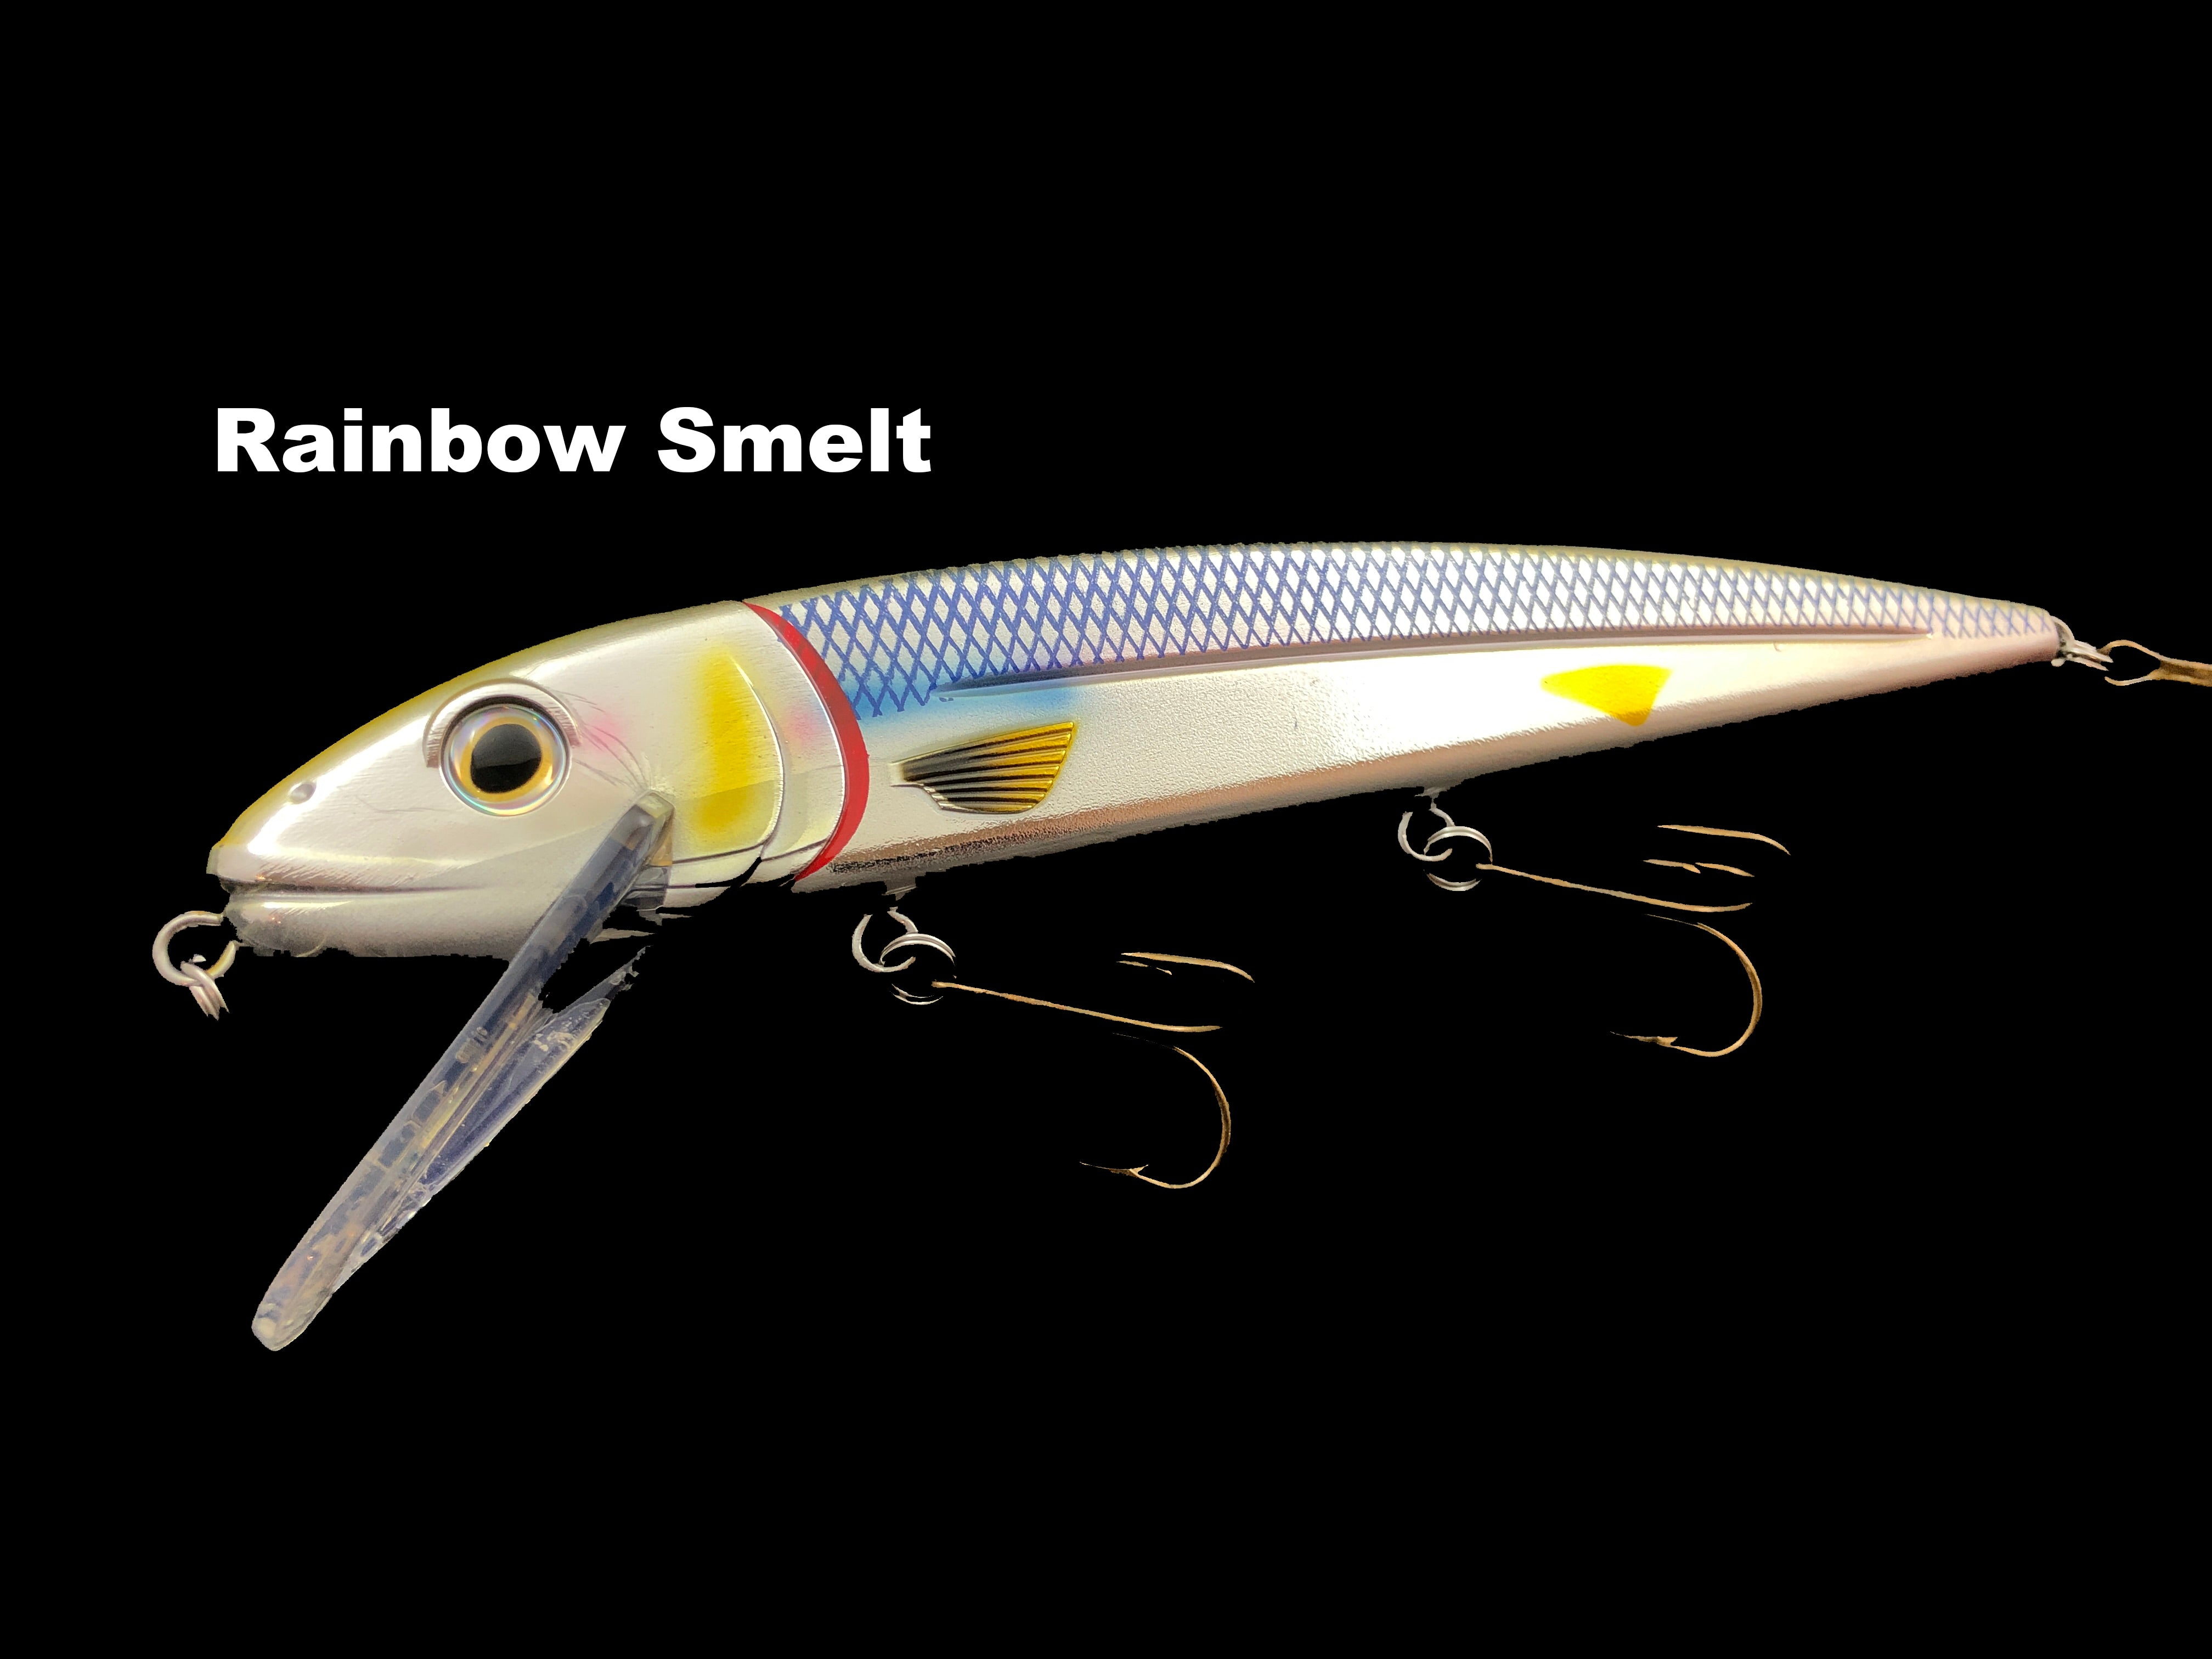 Livingston Lures Squeaky Pete - Musky Tackle Online